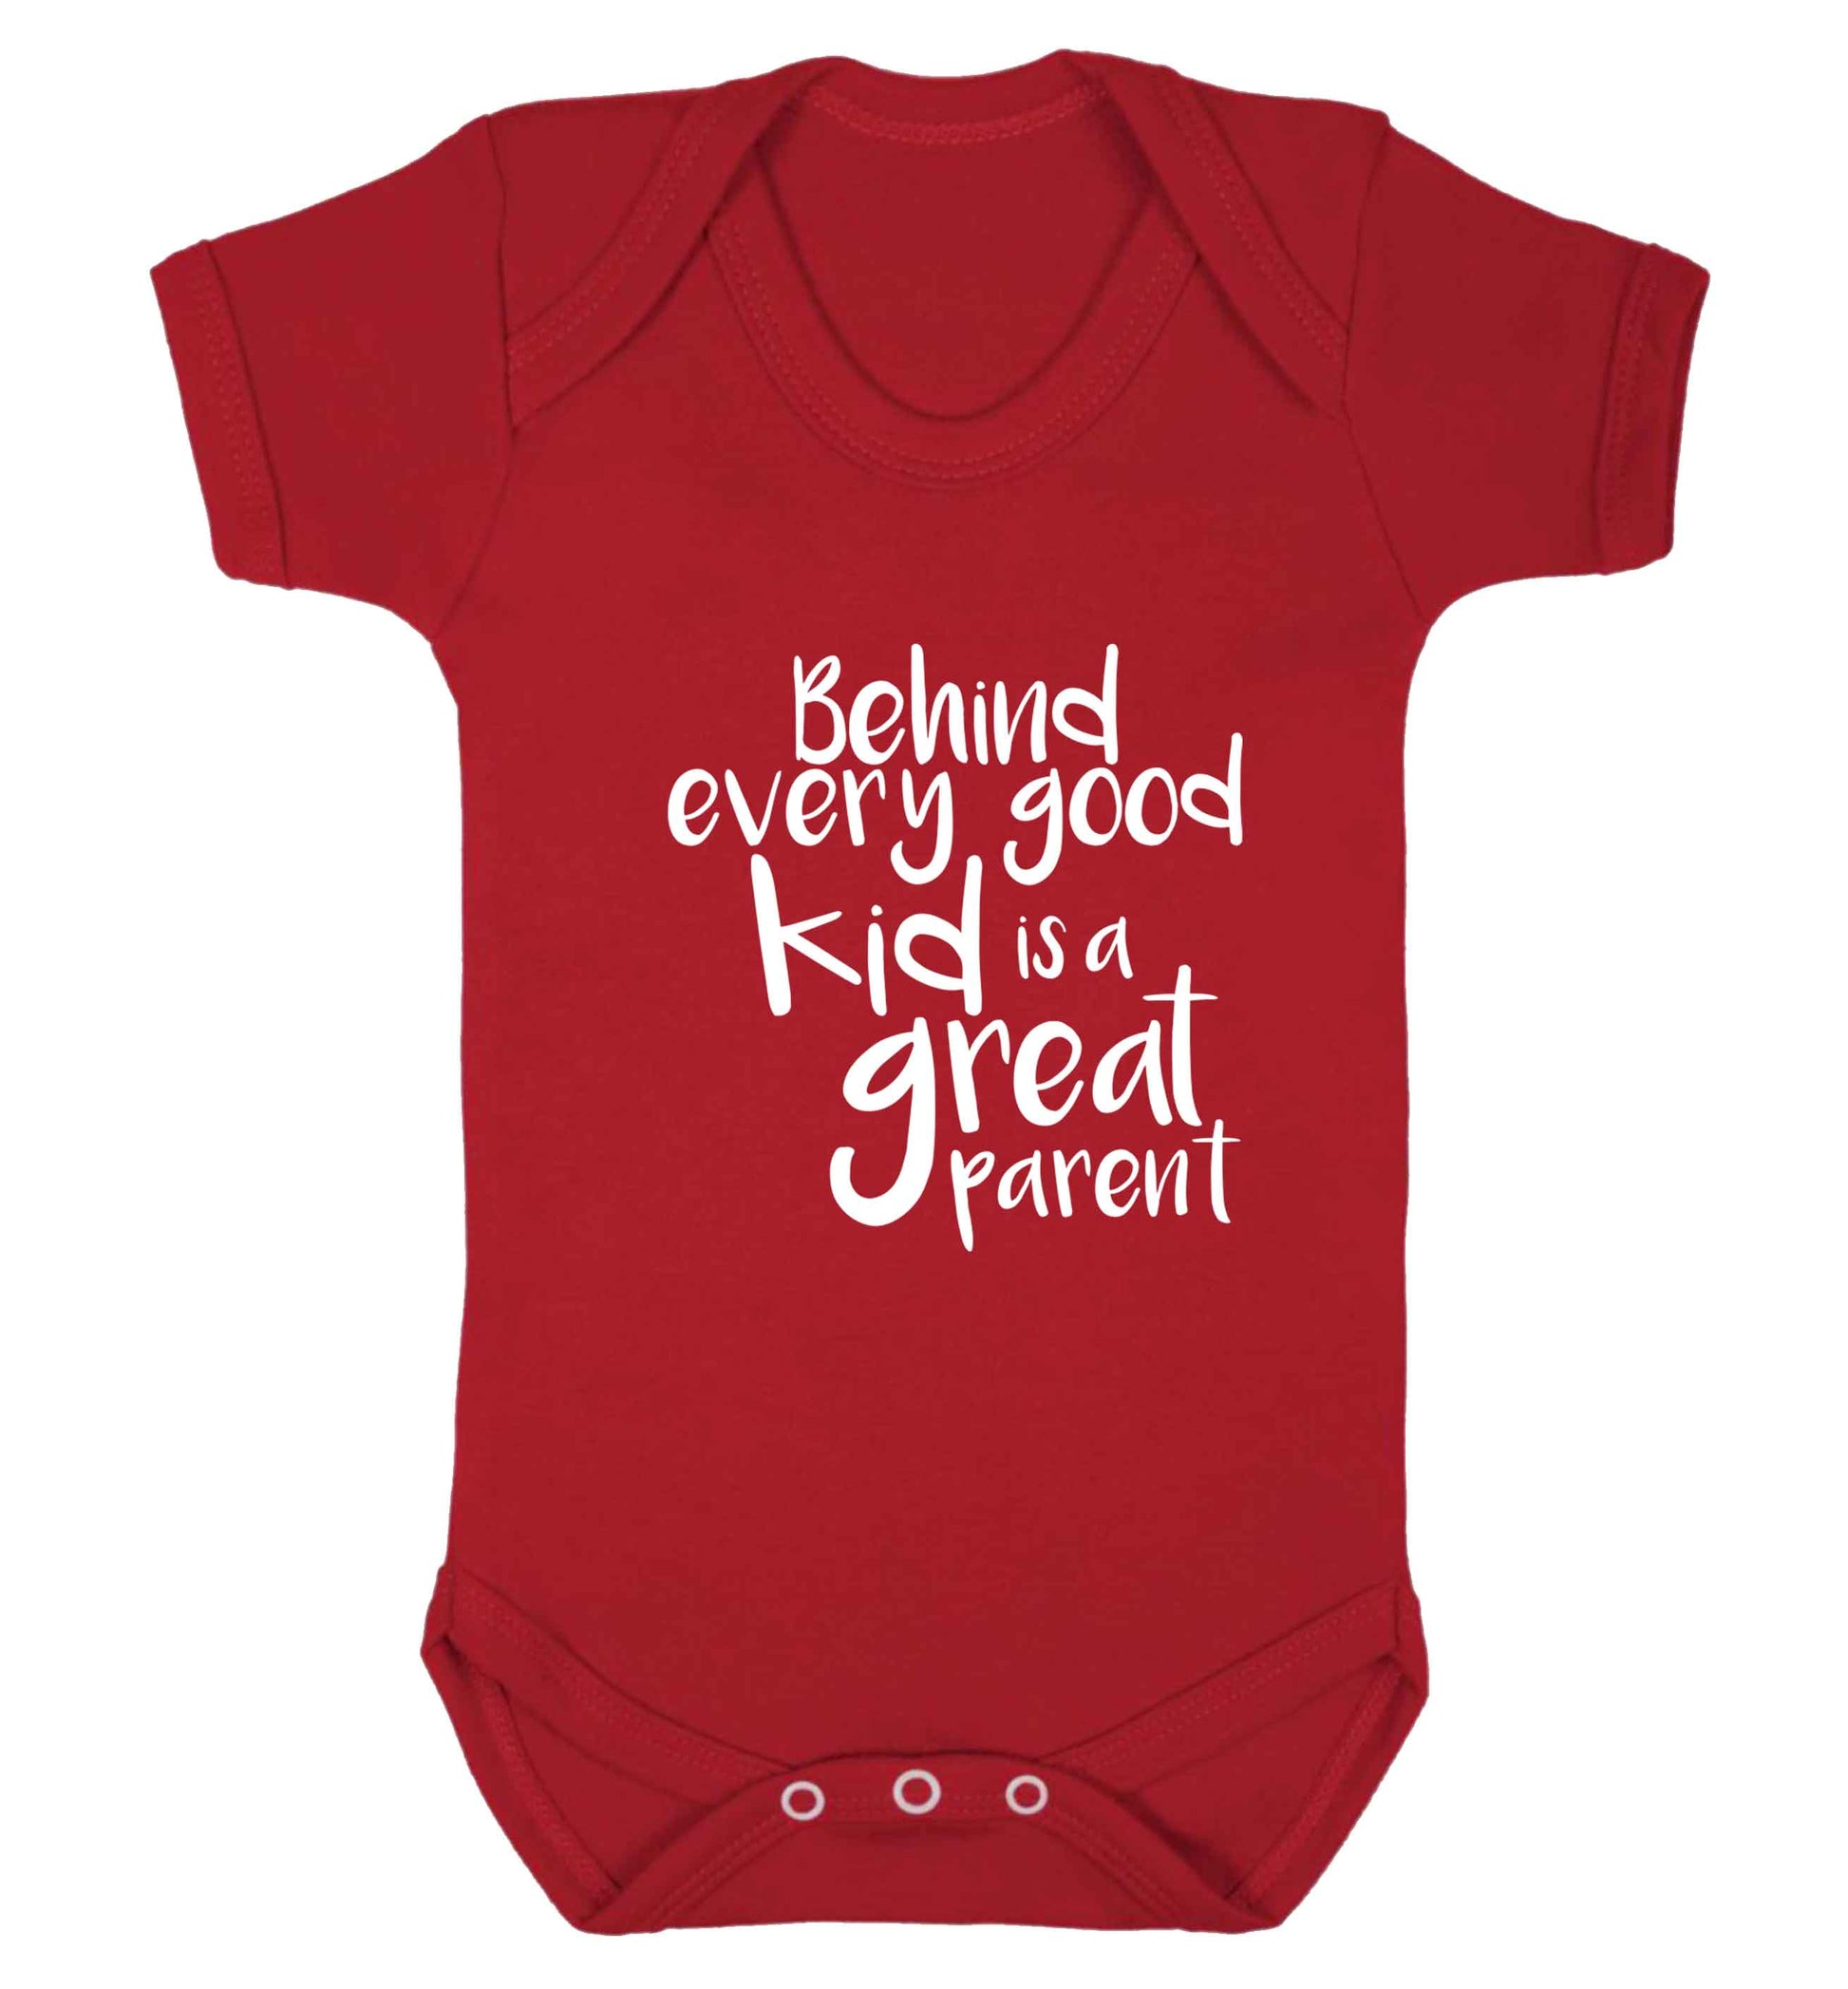 Behind every good kid is a great parent baby vest red 18-24 months